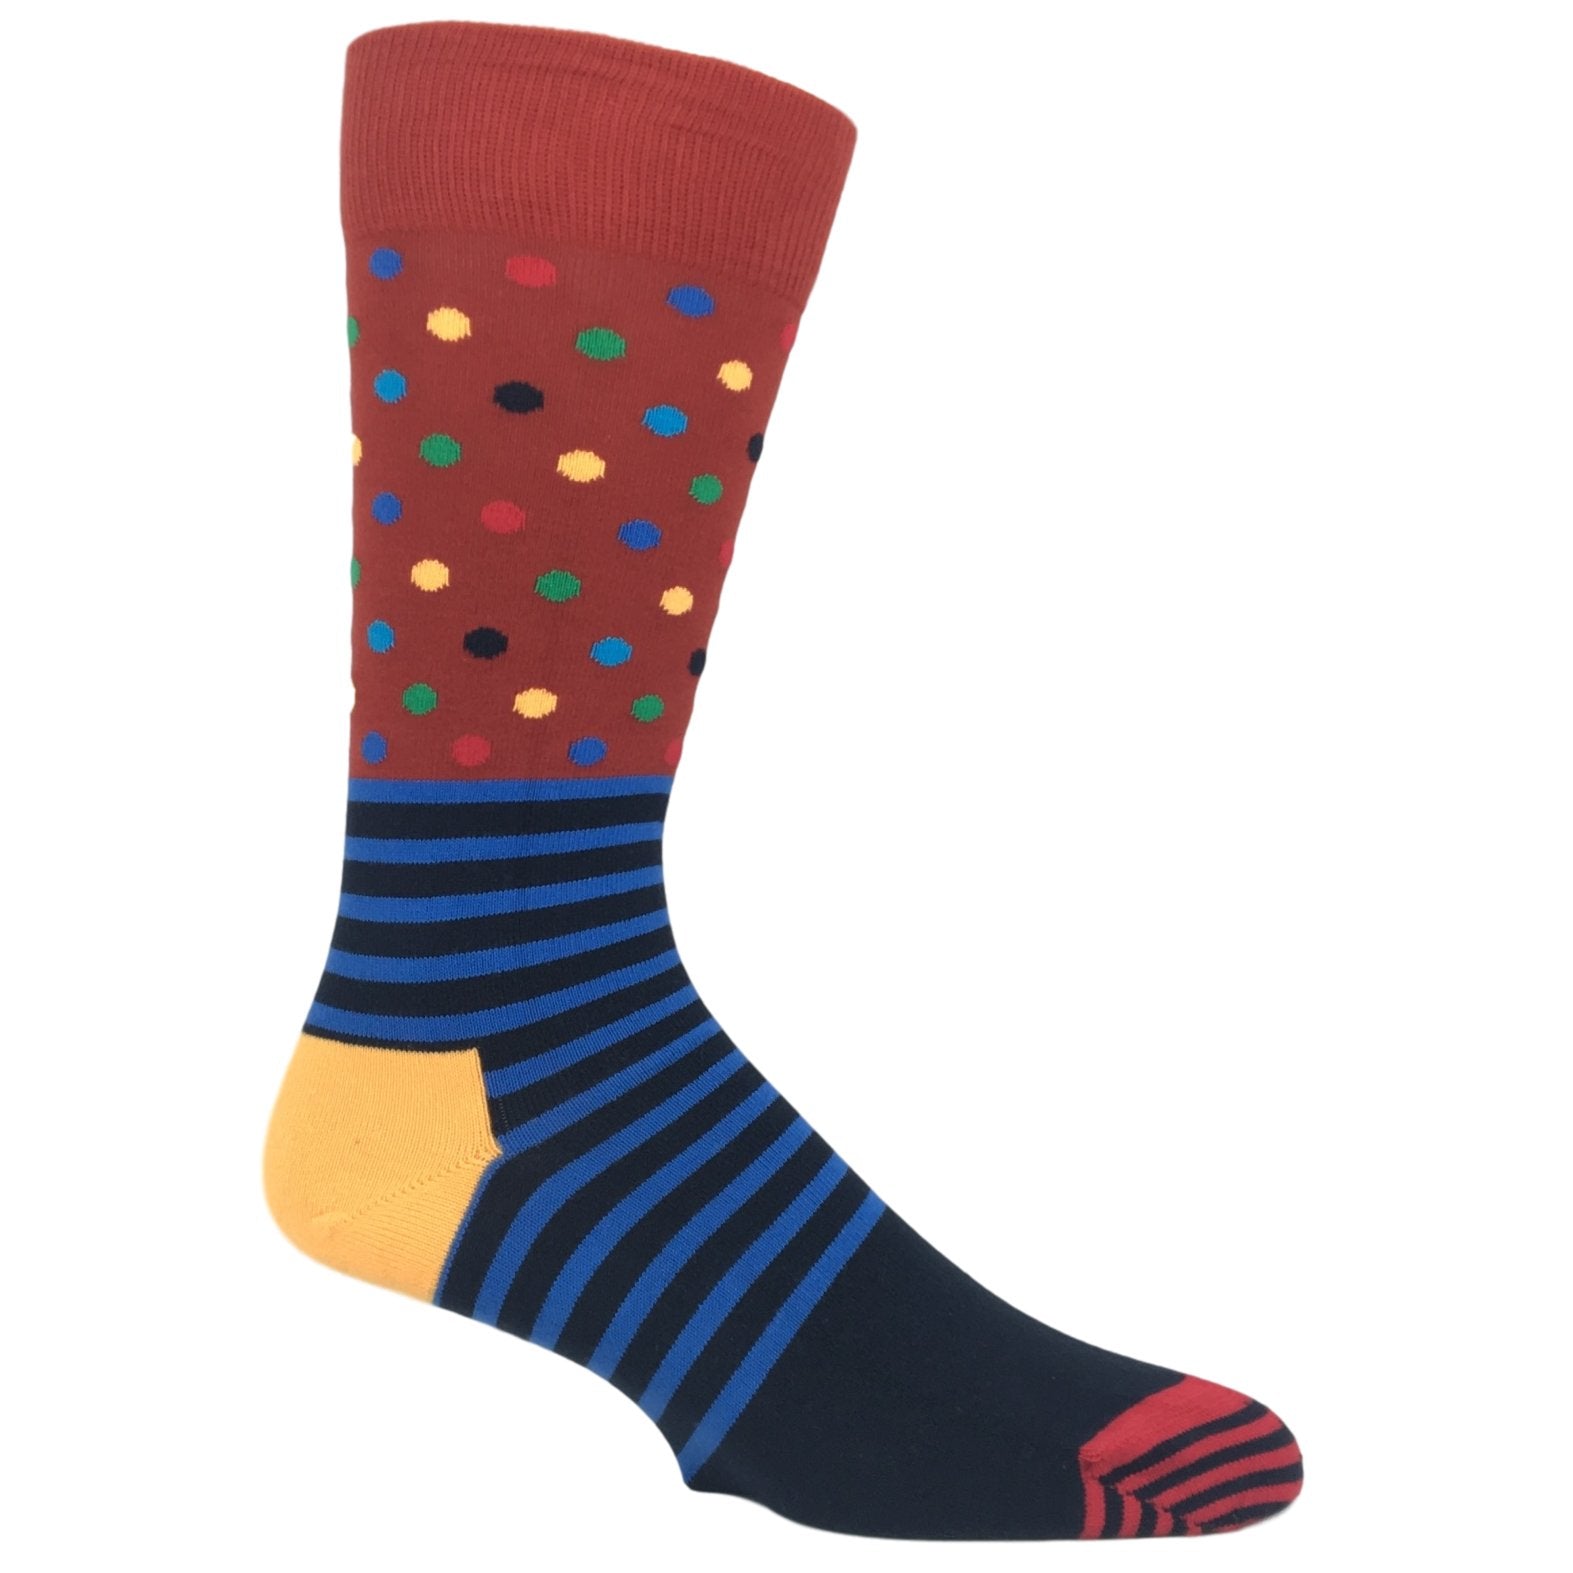 Red and Blue Stripes & Dots Socks by Happy Socks